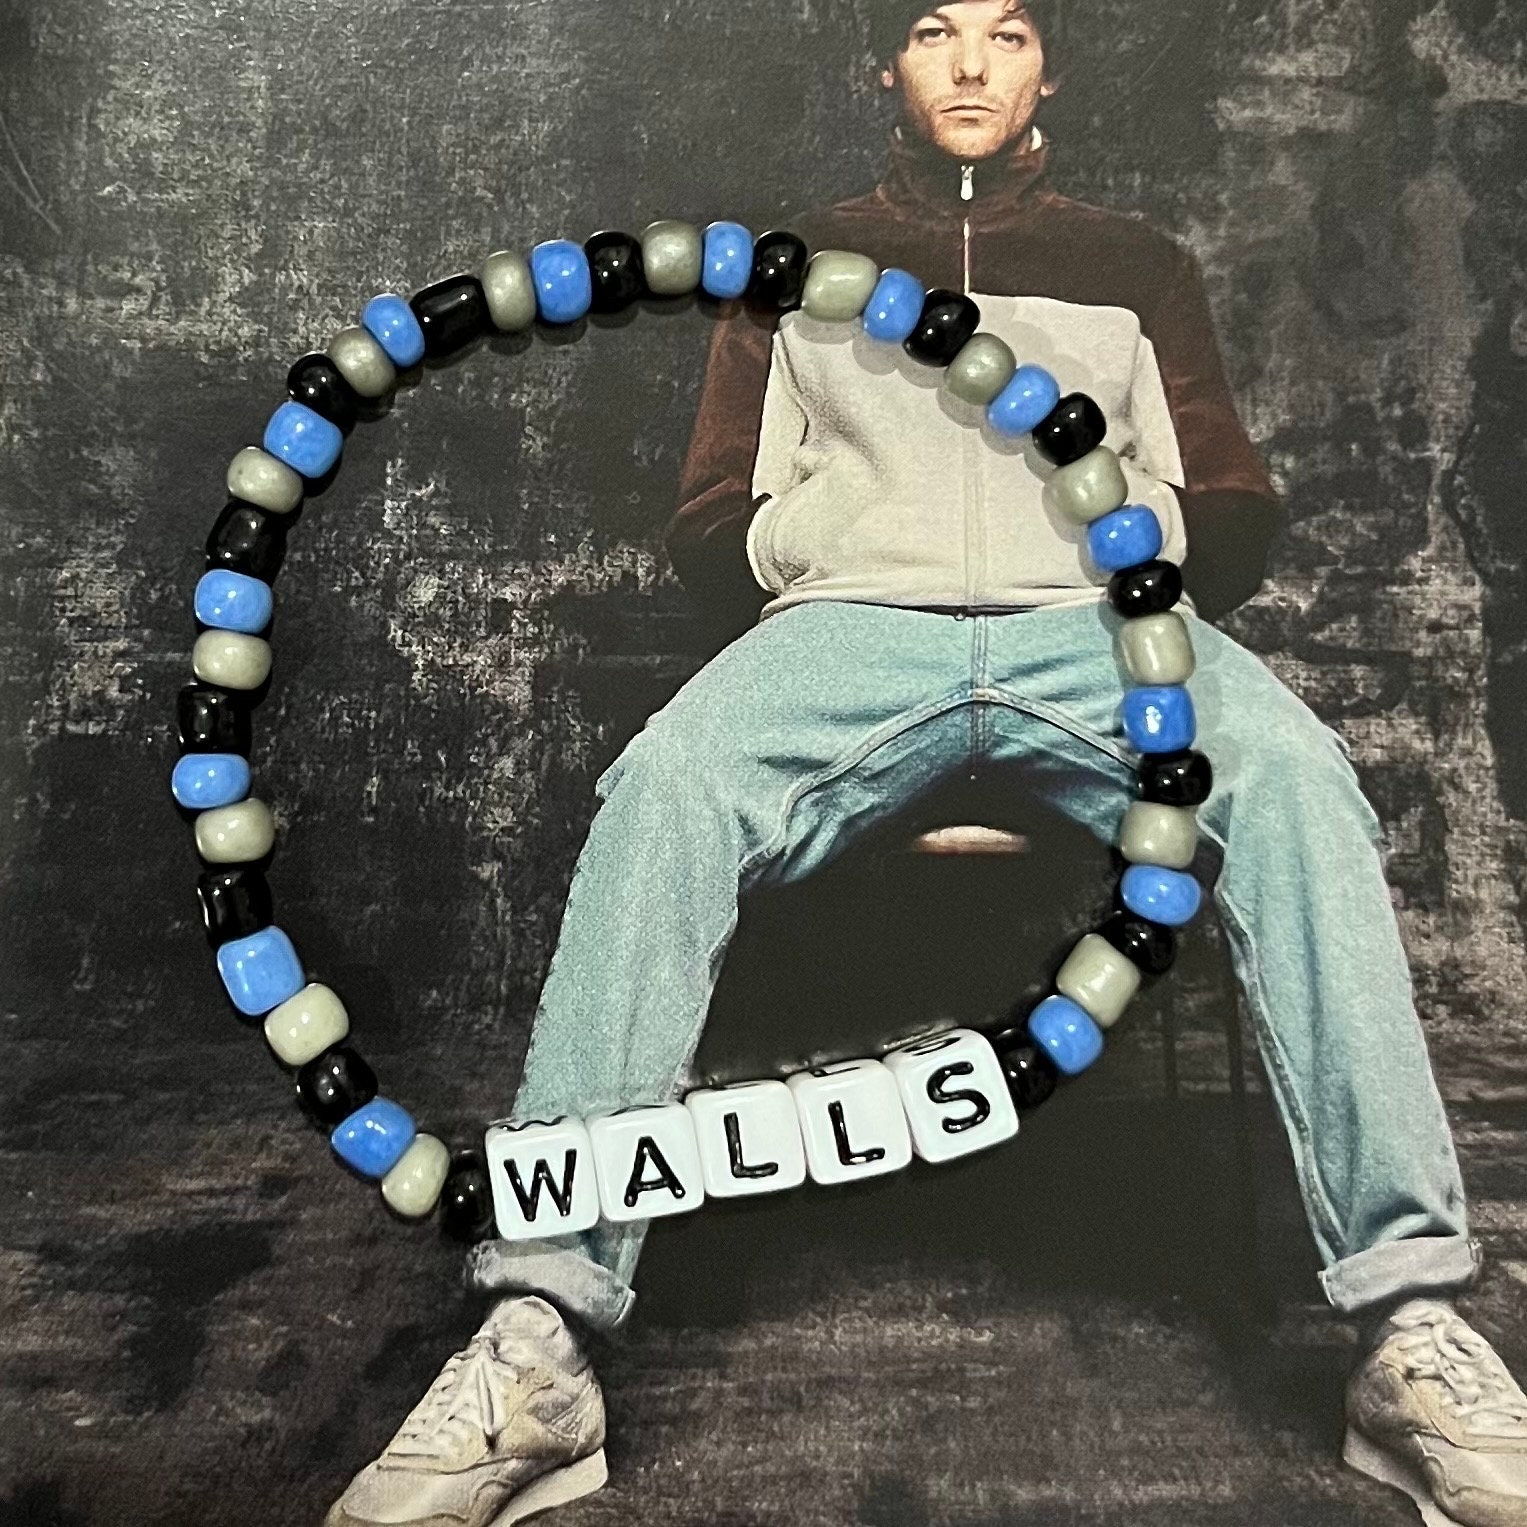 5-PACK LOUIS TOMLINSON Friendship Bracelets With Charms 